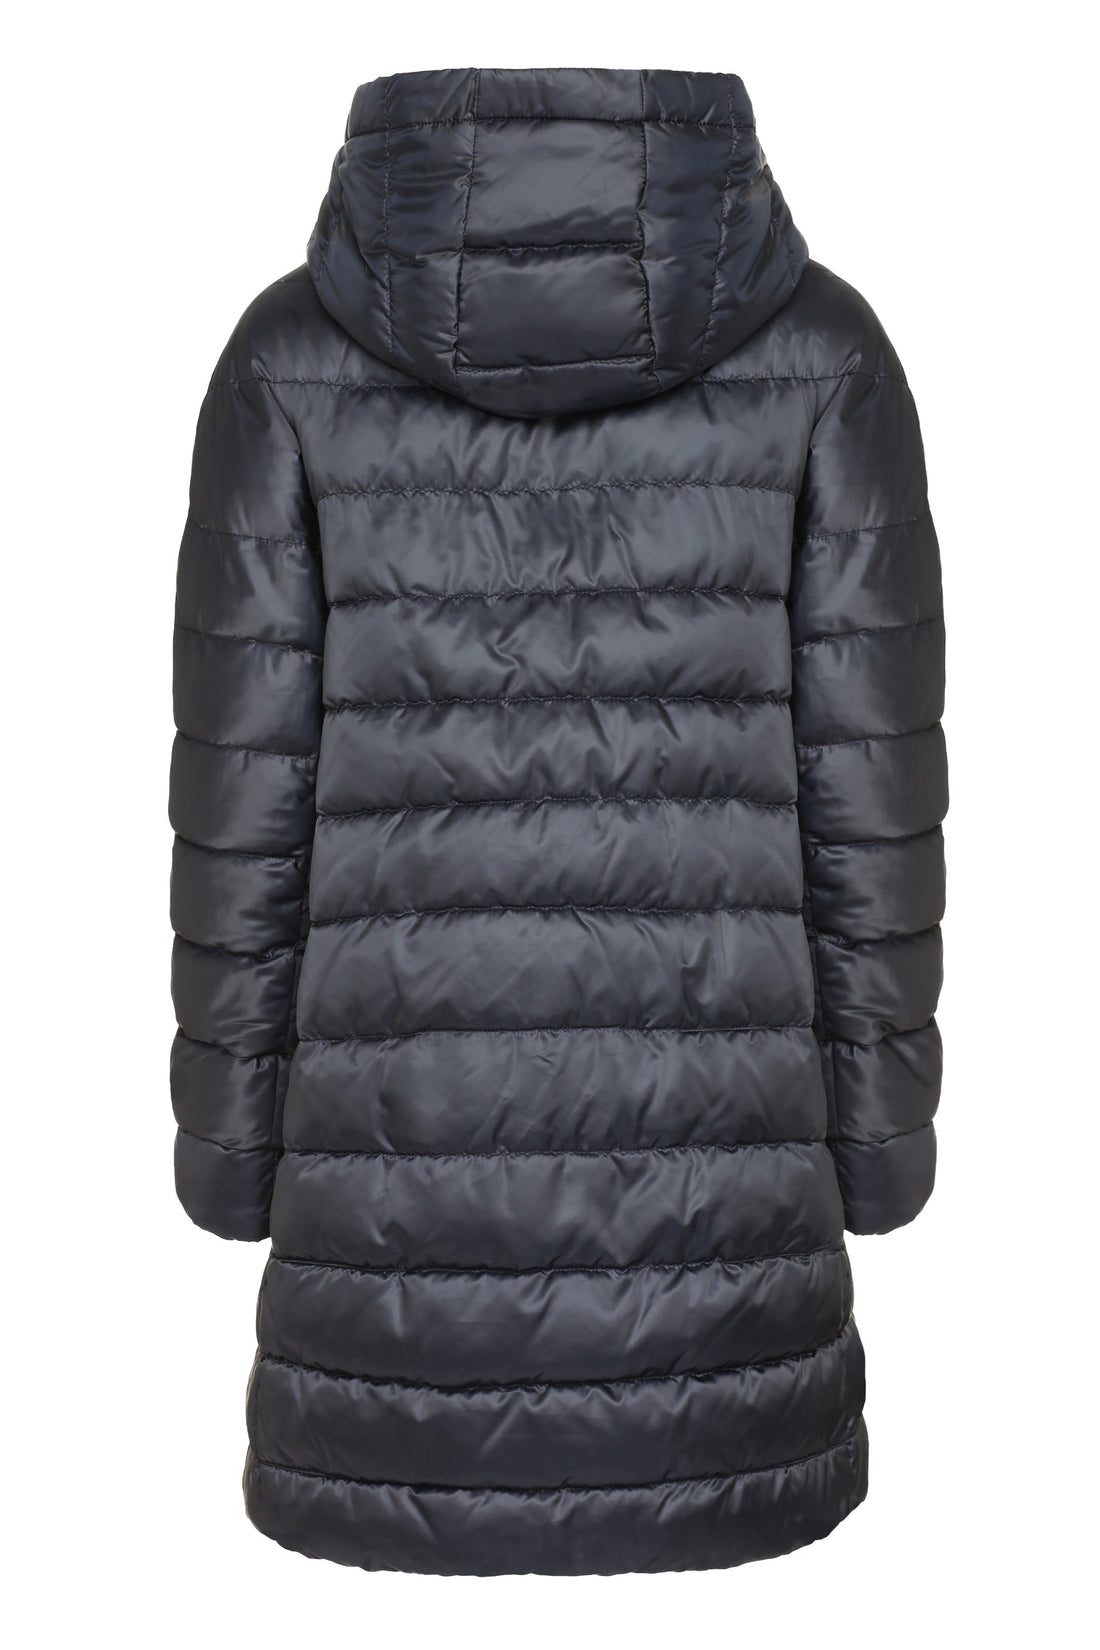 Max Mara-OUTLET-SALE-Noveca hooded down jacket-ARCHIVIST